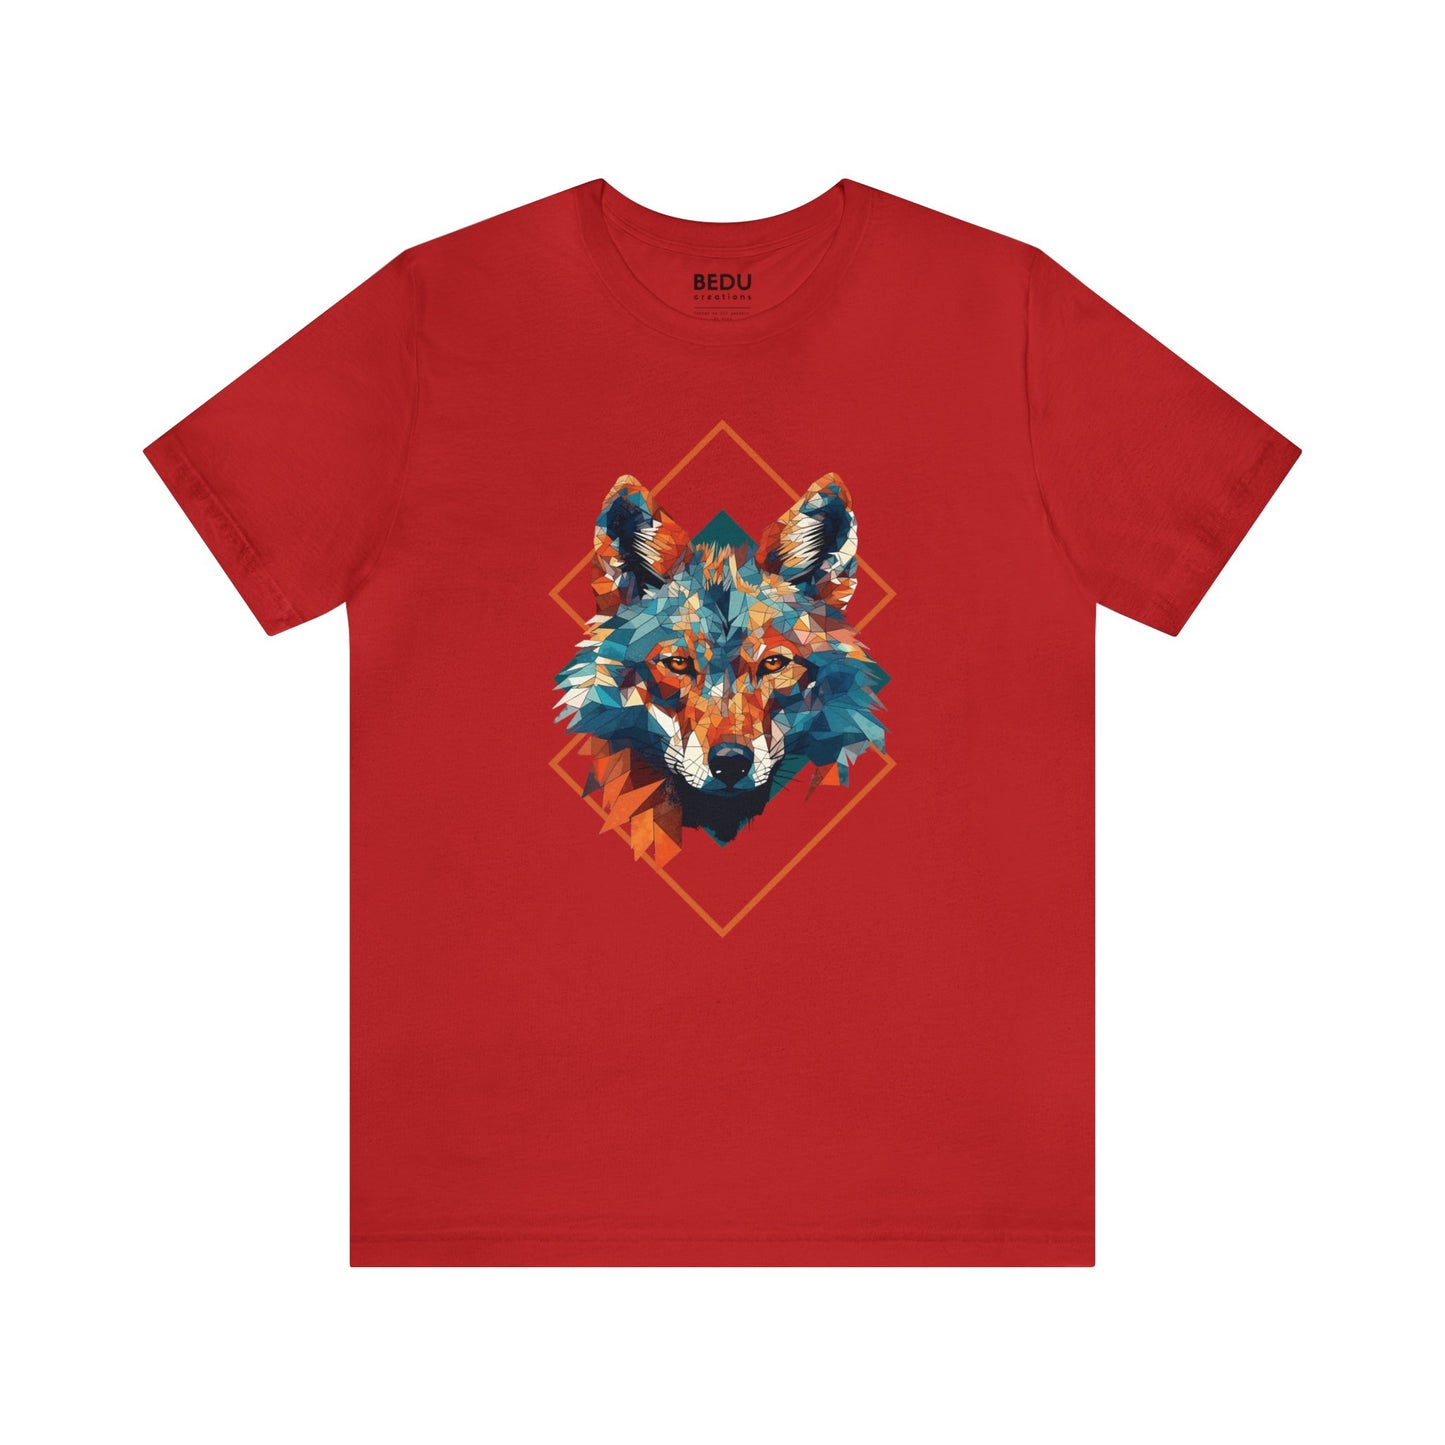 Majestic Geometric Wolf Head T-Shirt for Wolf Lovers with Turquoise, Orange, and Triangular Shapes